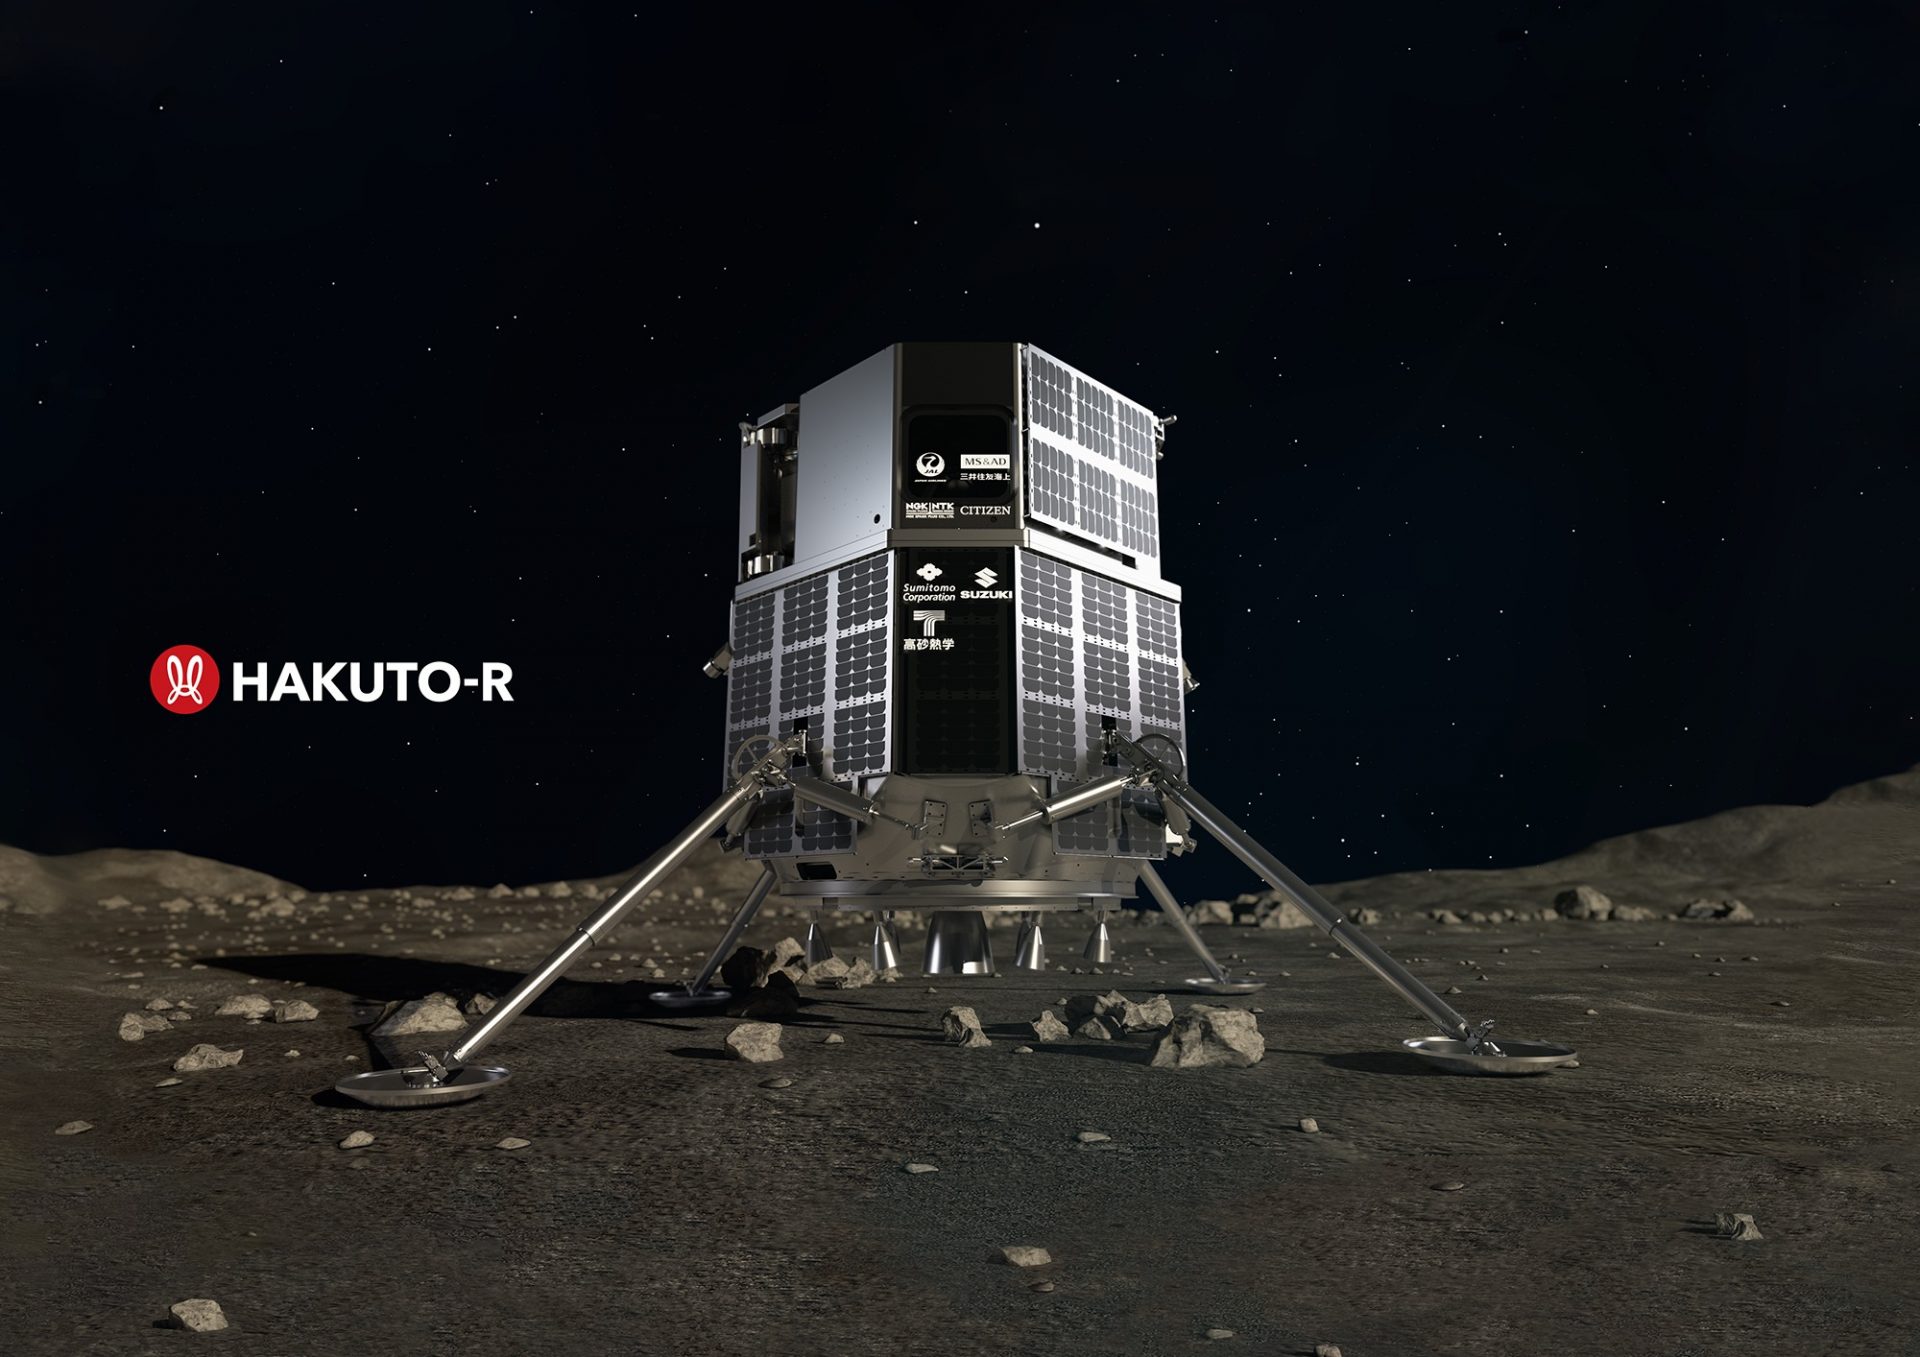 Japan’s ispace targets for 2022 moon landing for non-public Hakuto-R spacecraft